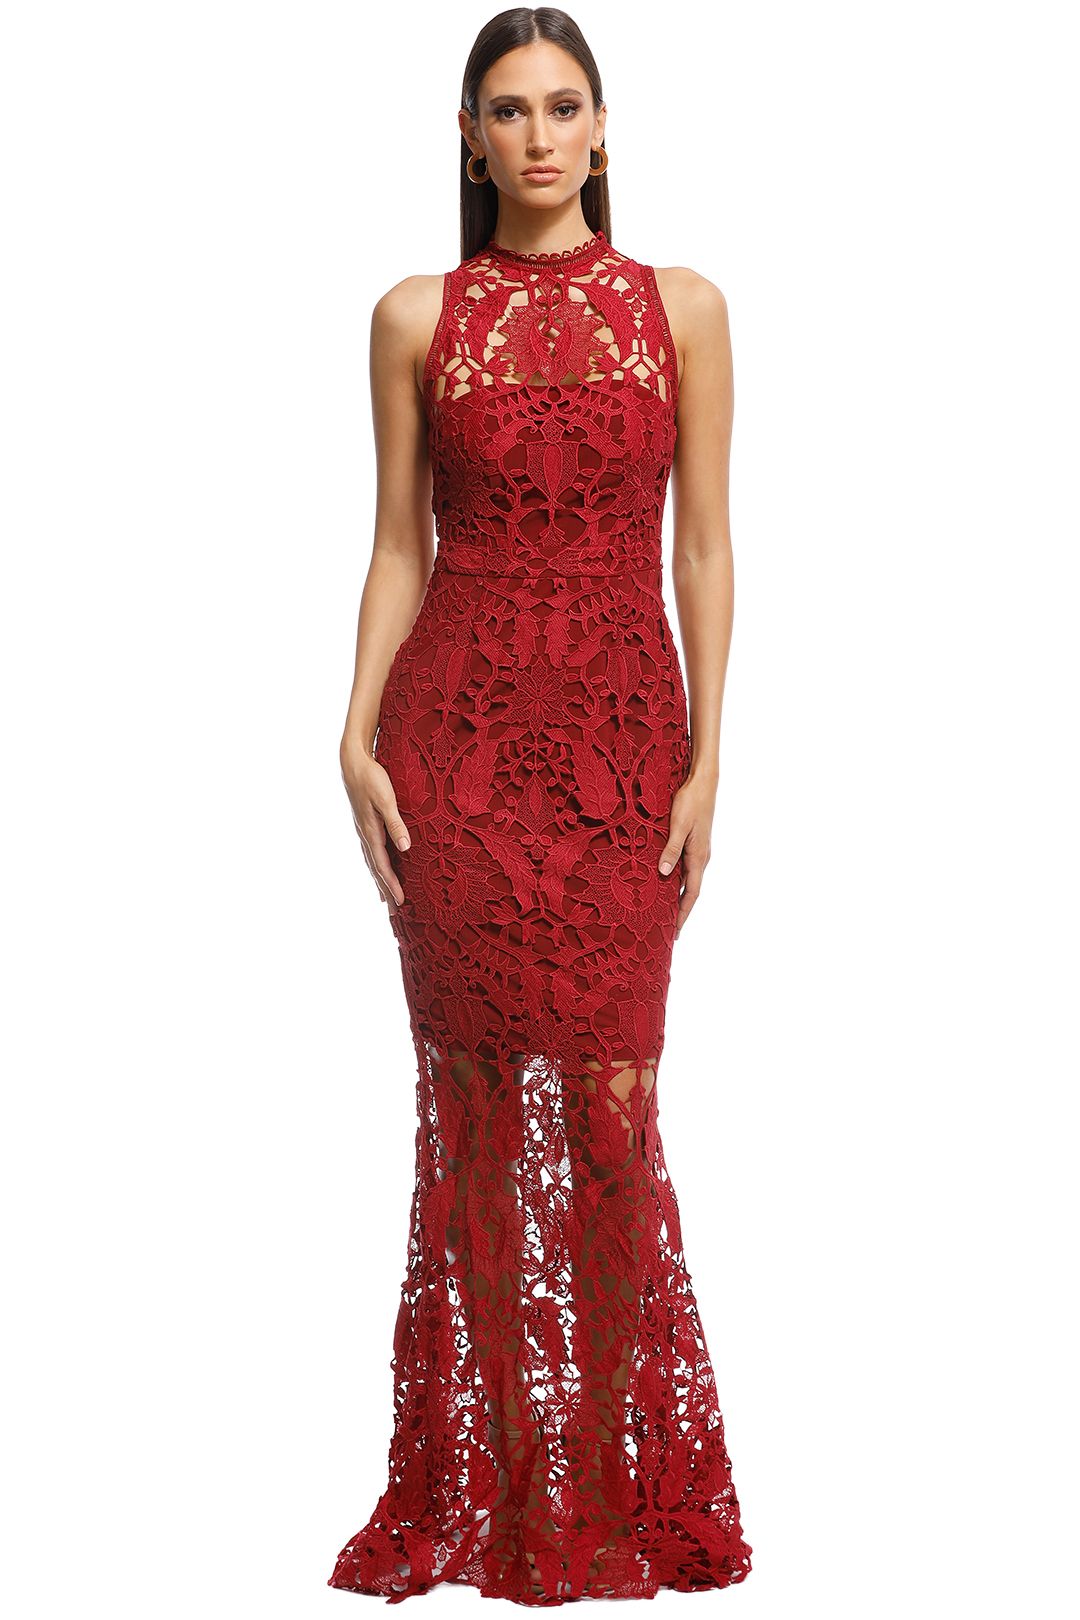 Prosecco Gown in Red by Grace & Hart for Rent | GlamCorner